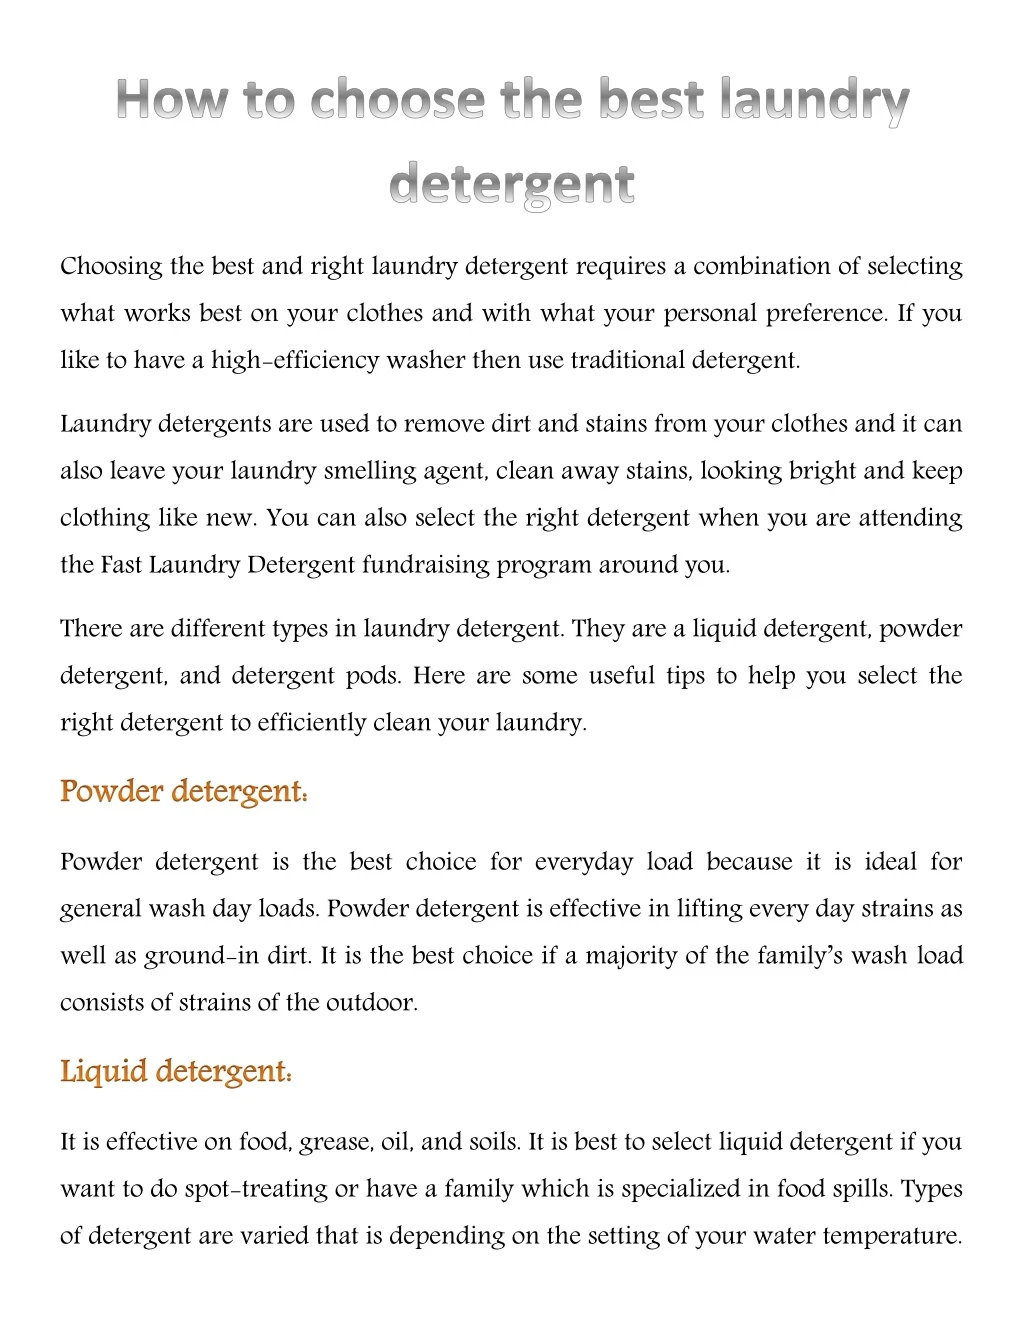 choosing the best and right laundry detergent